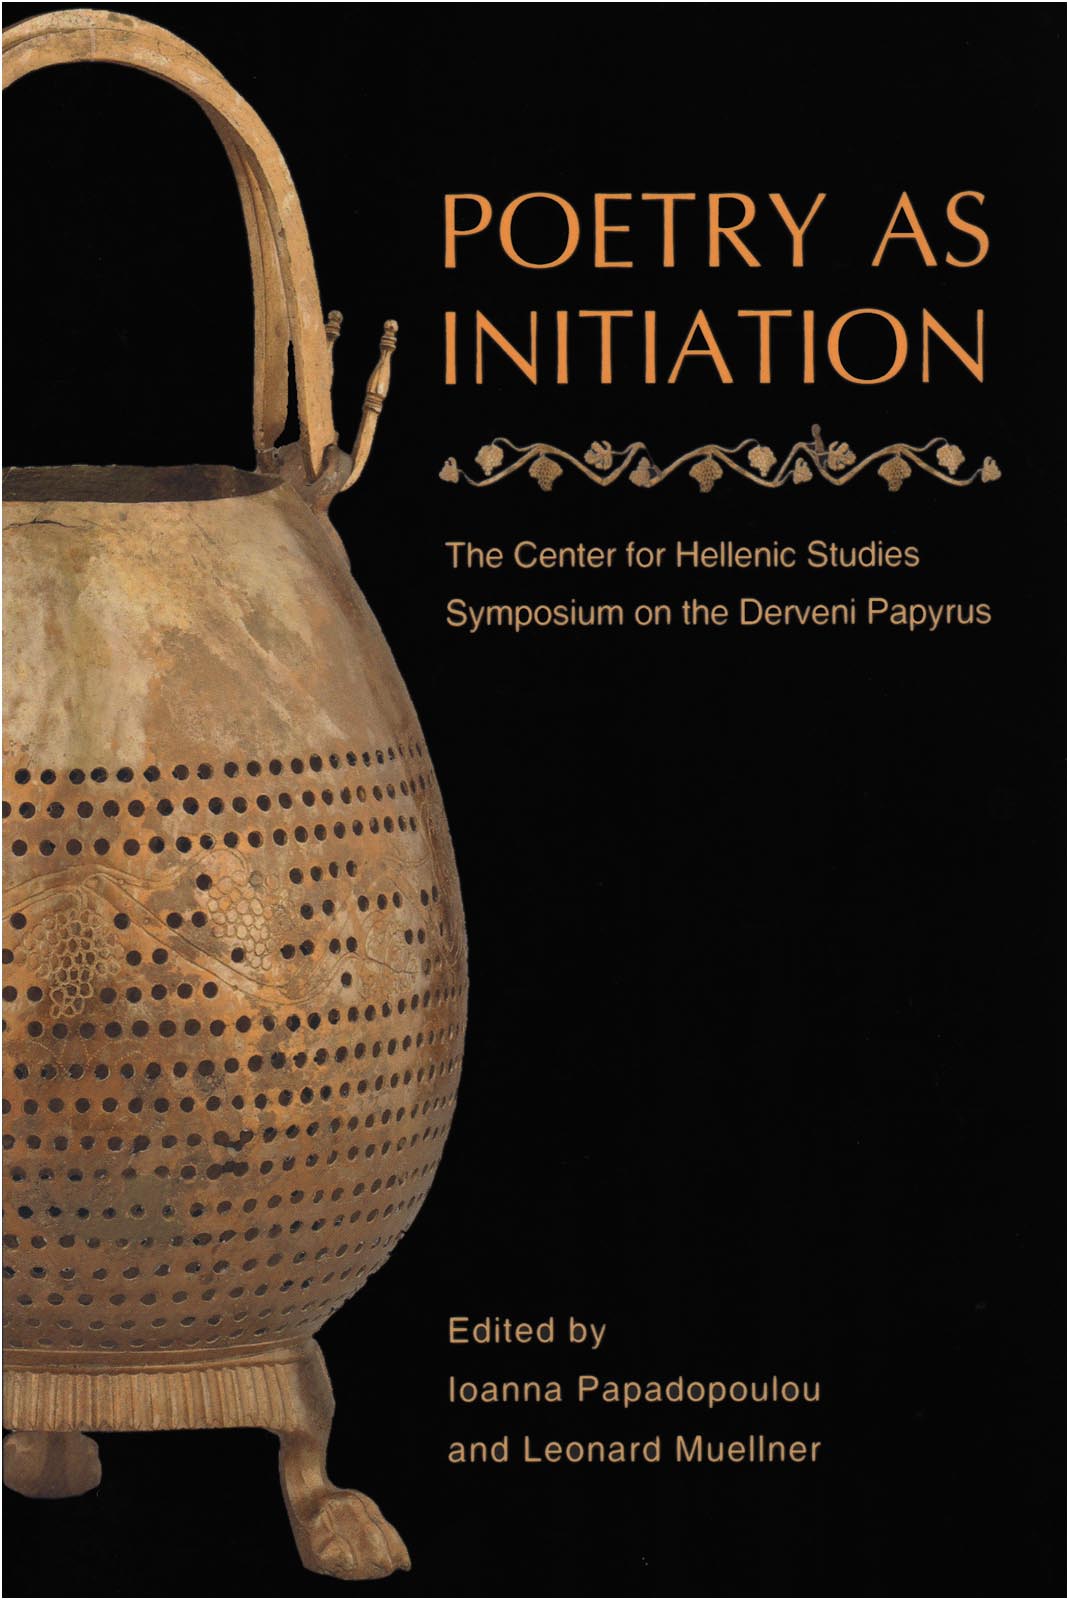 Poetry as Initiation. The Center for Hellenic Studies Symposium on the Derveni Papyrus. Papadopoulou, I., Mueller, L. (eds.). Center for Hellenic Studies. Trustees of Harvard University, USA, 2014 (ISBN: 978-0-674-72676-5).